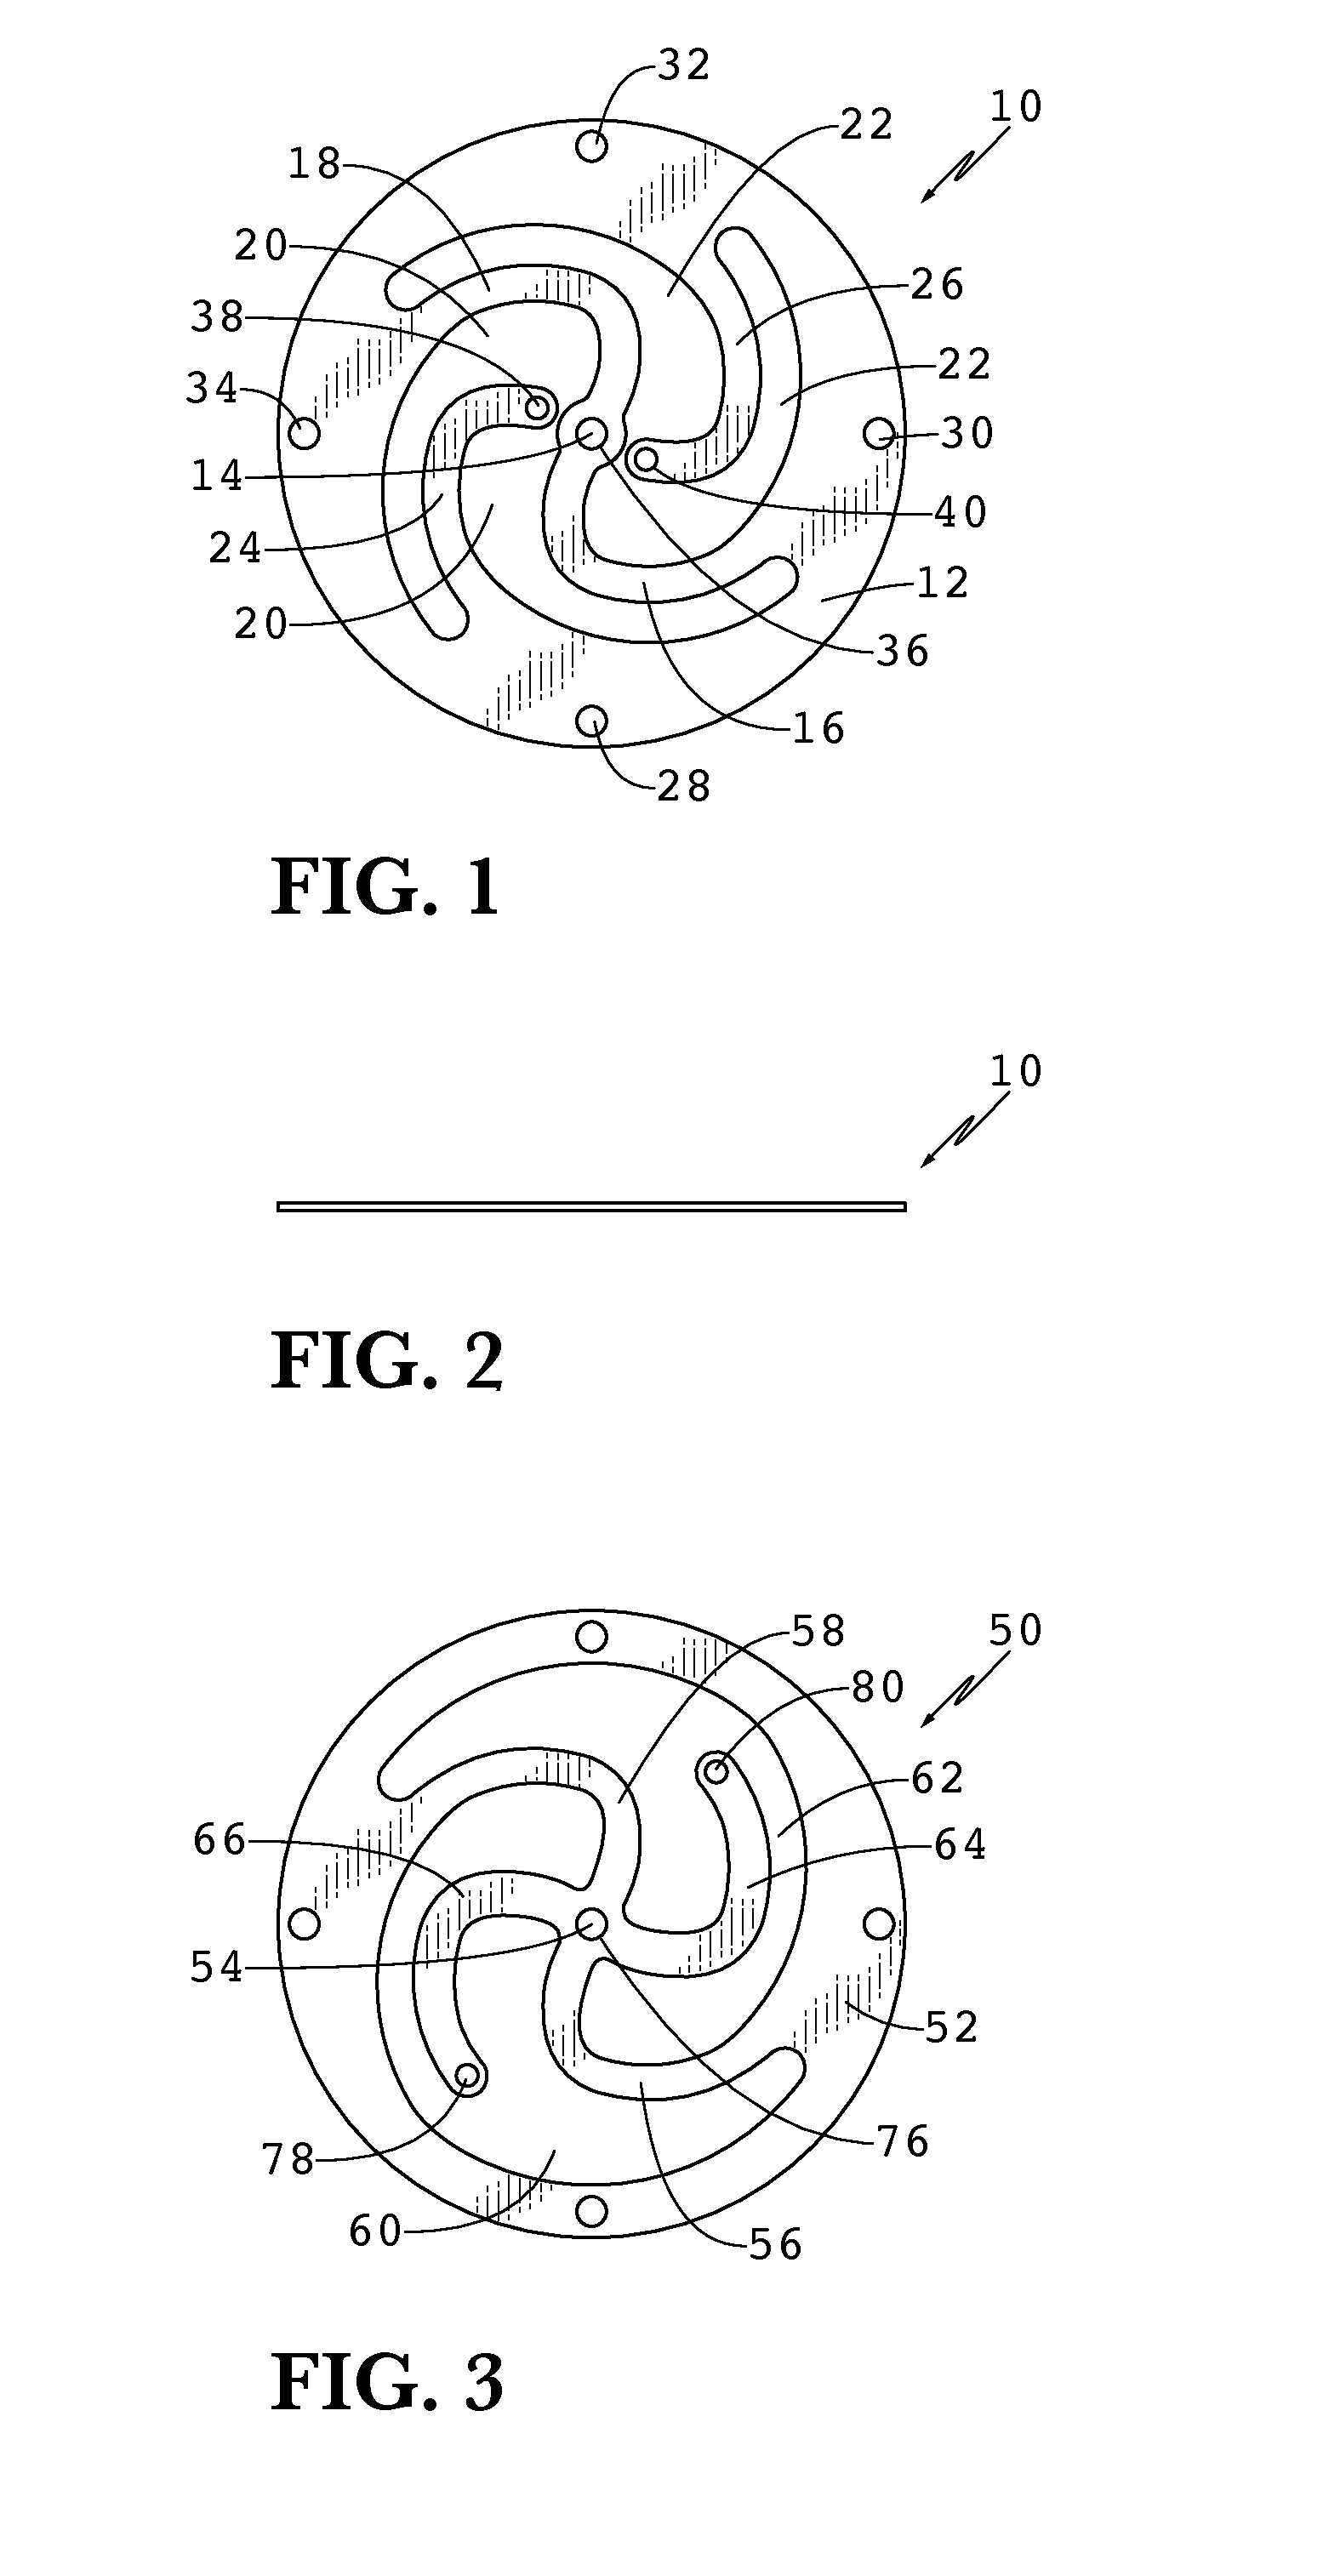 Compact flexure bearing spring for springing multiple bodies